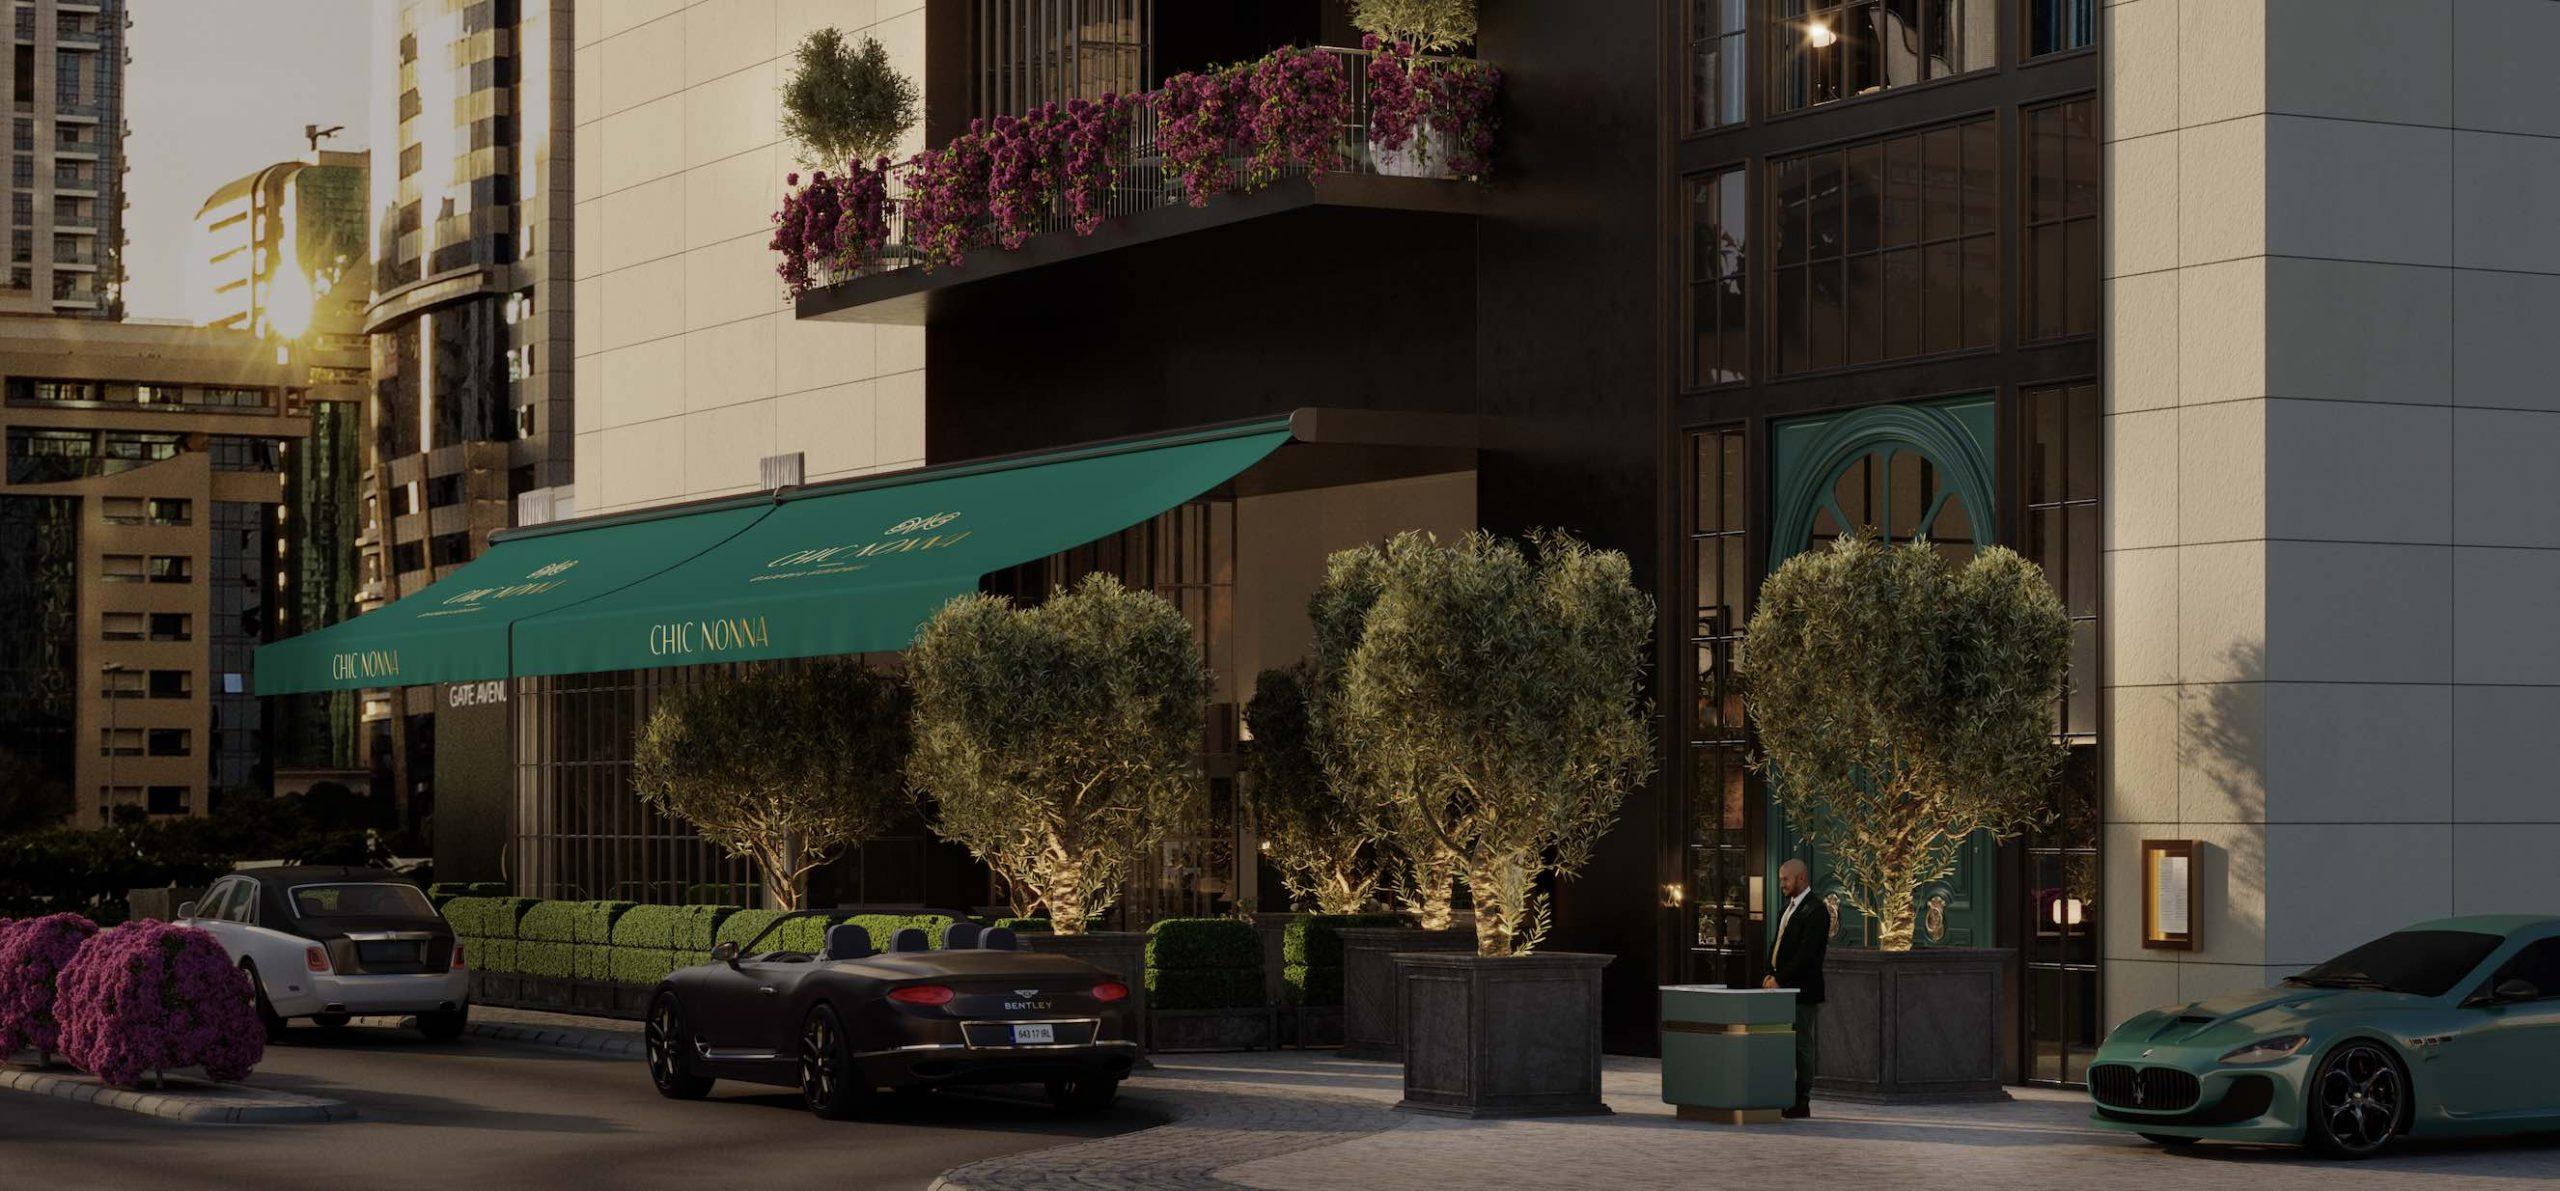 Chic Nonna Restaurant & Lounge is setting its sights on DIFC